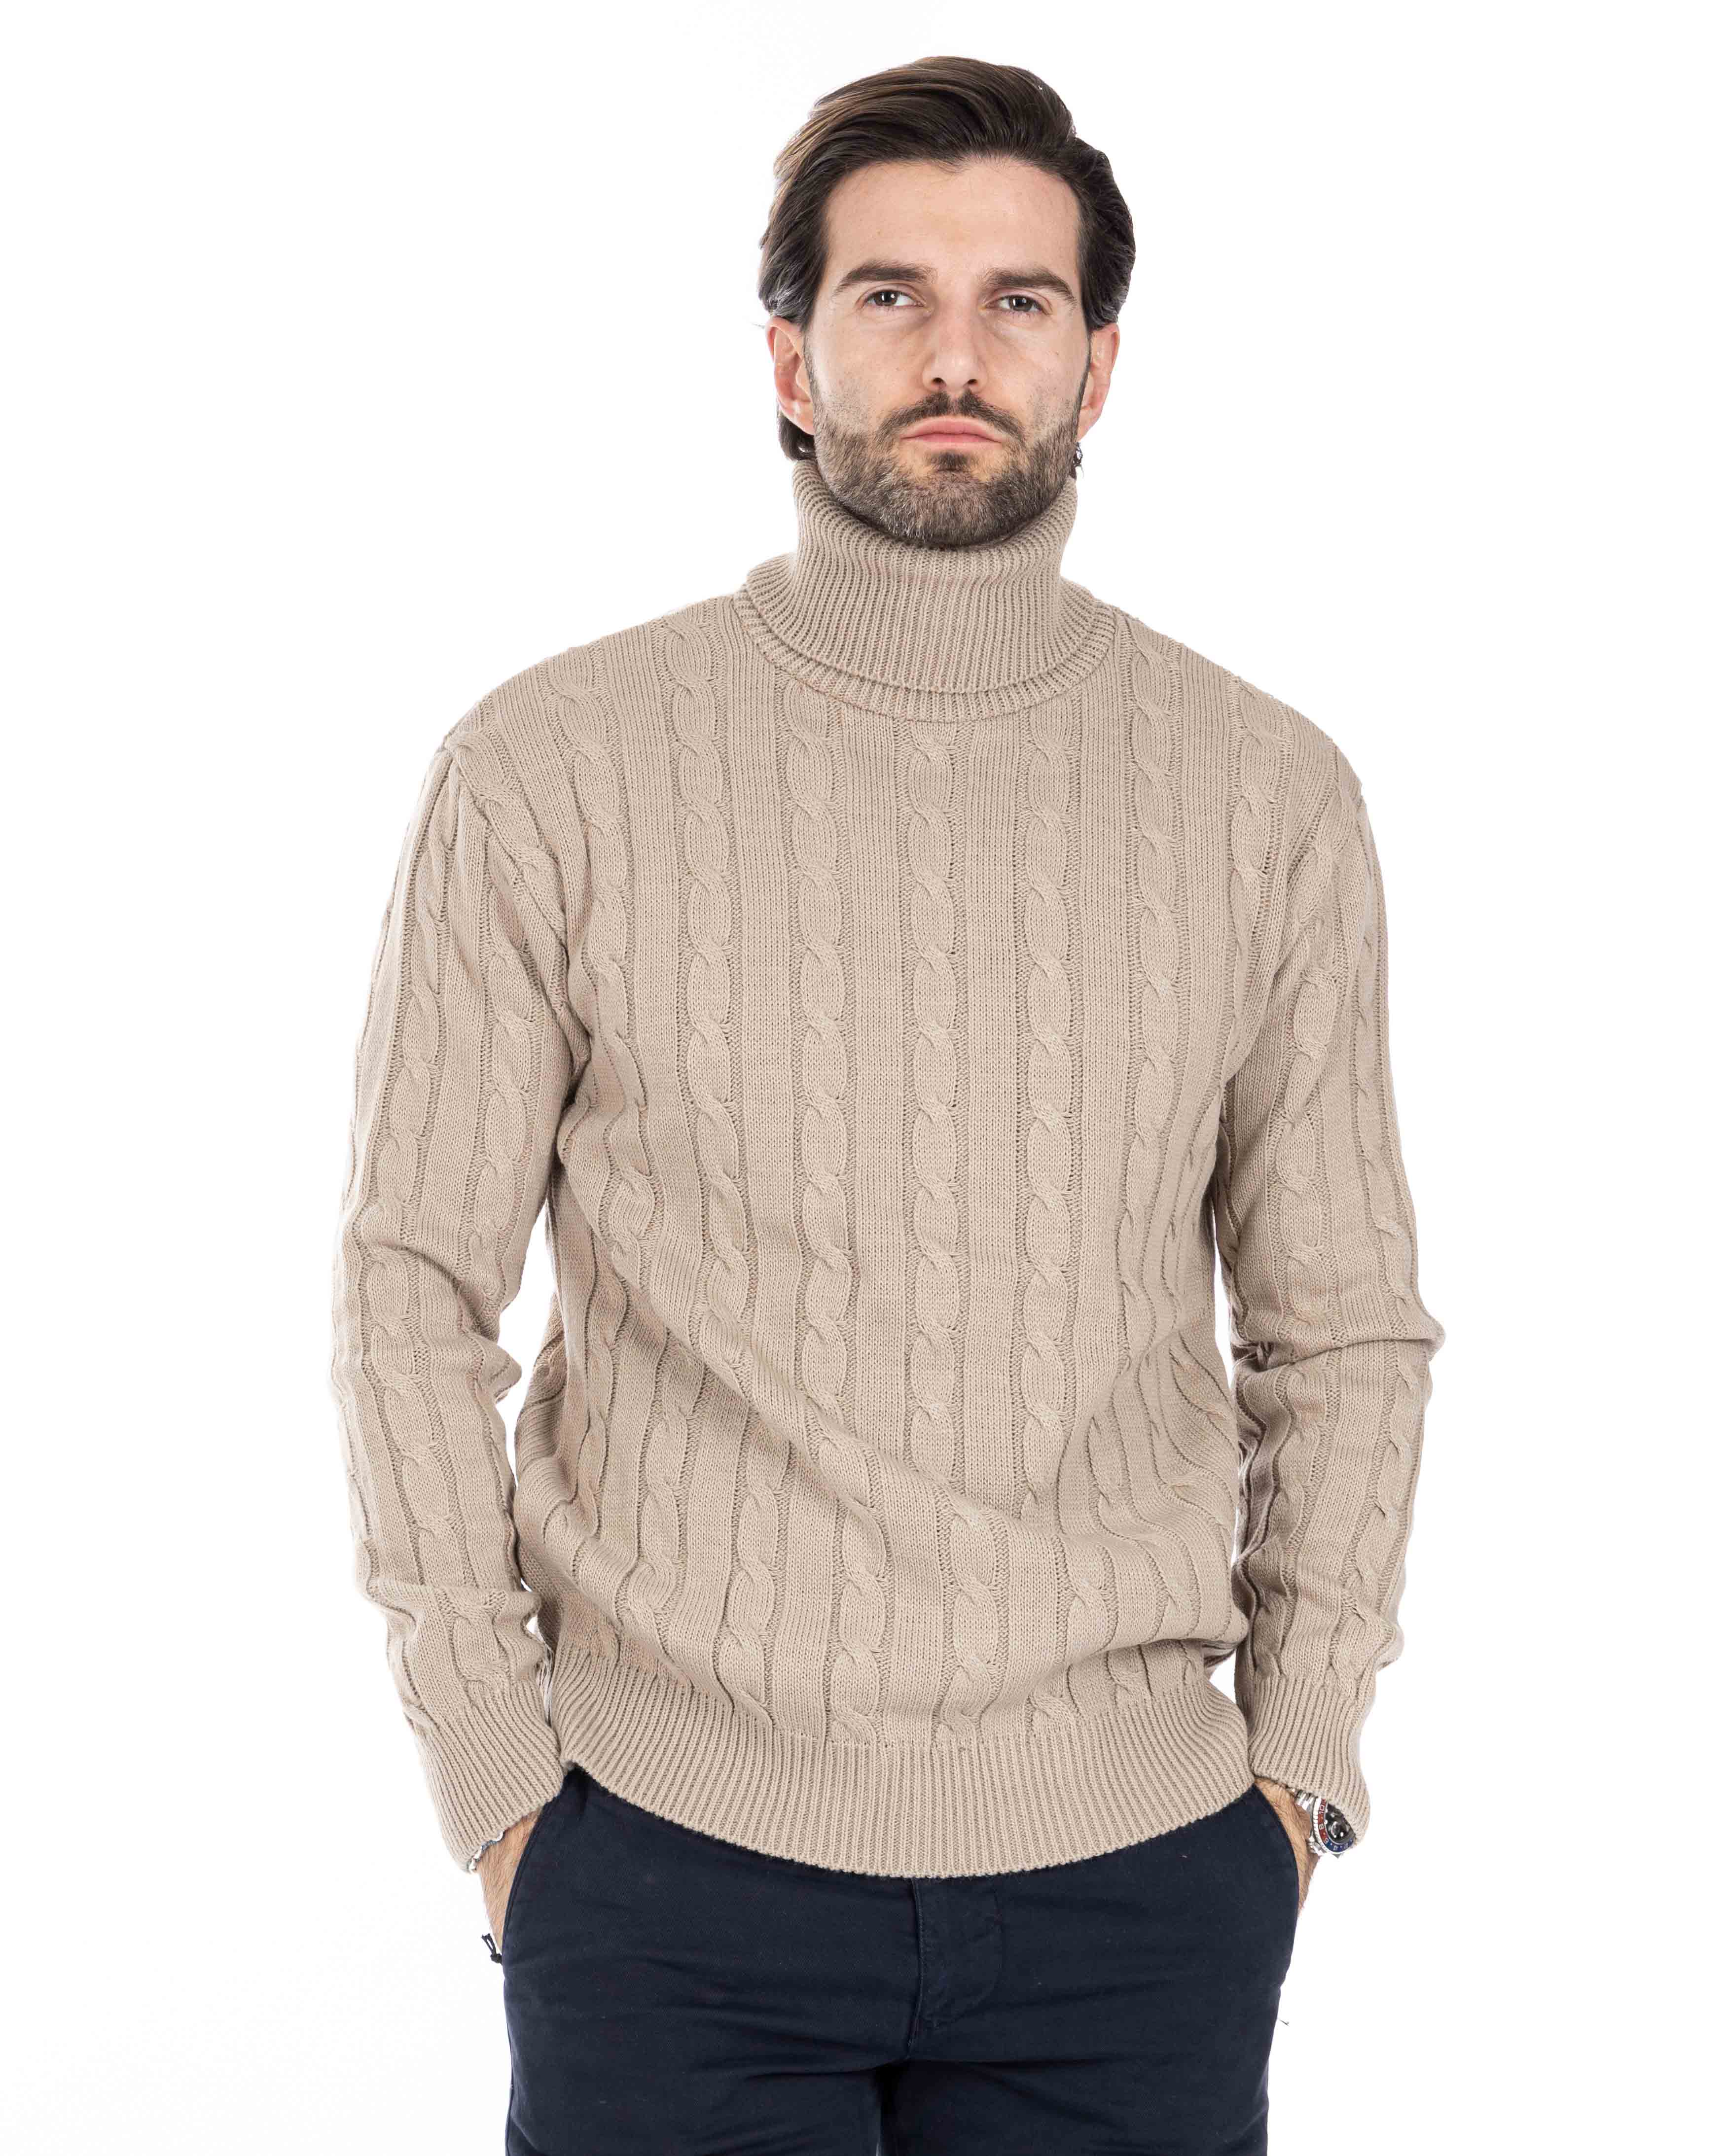 Crovie - beige sweater with high neck cables